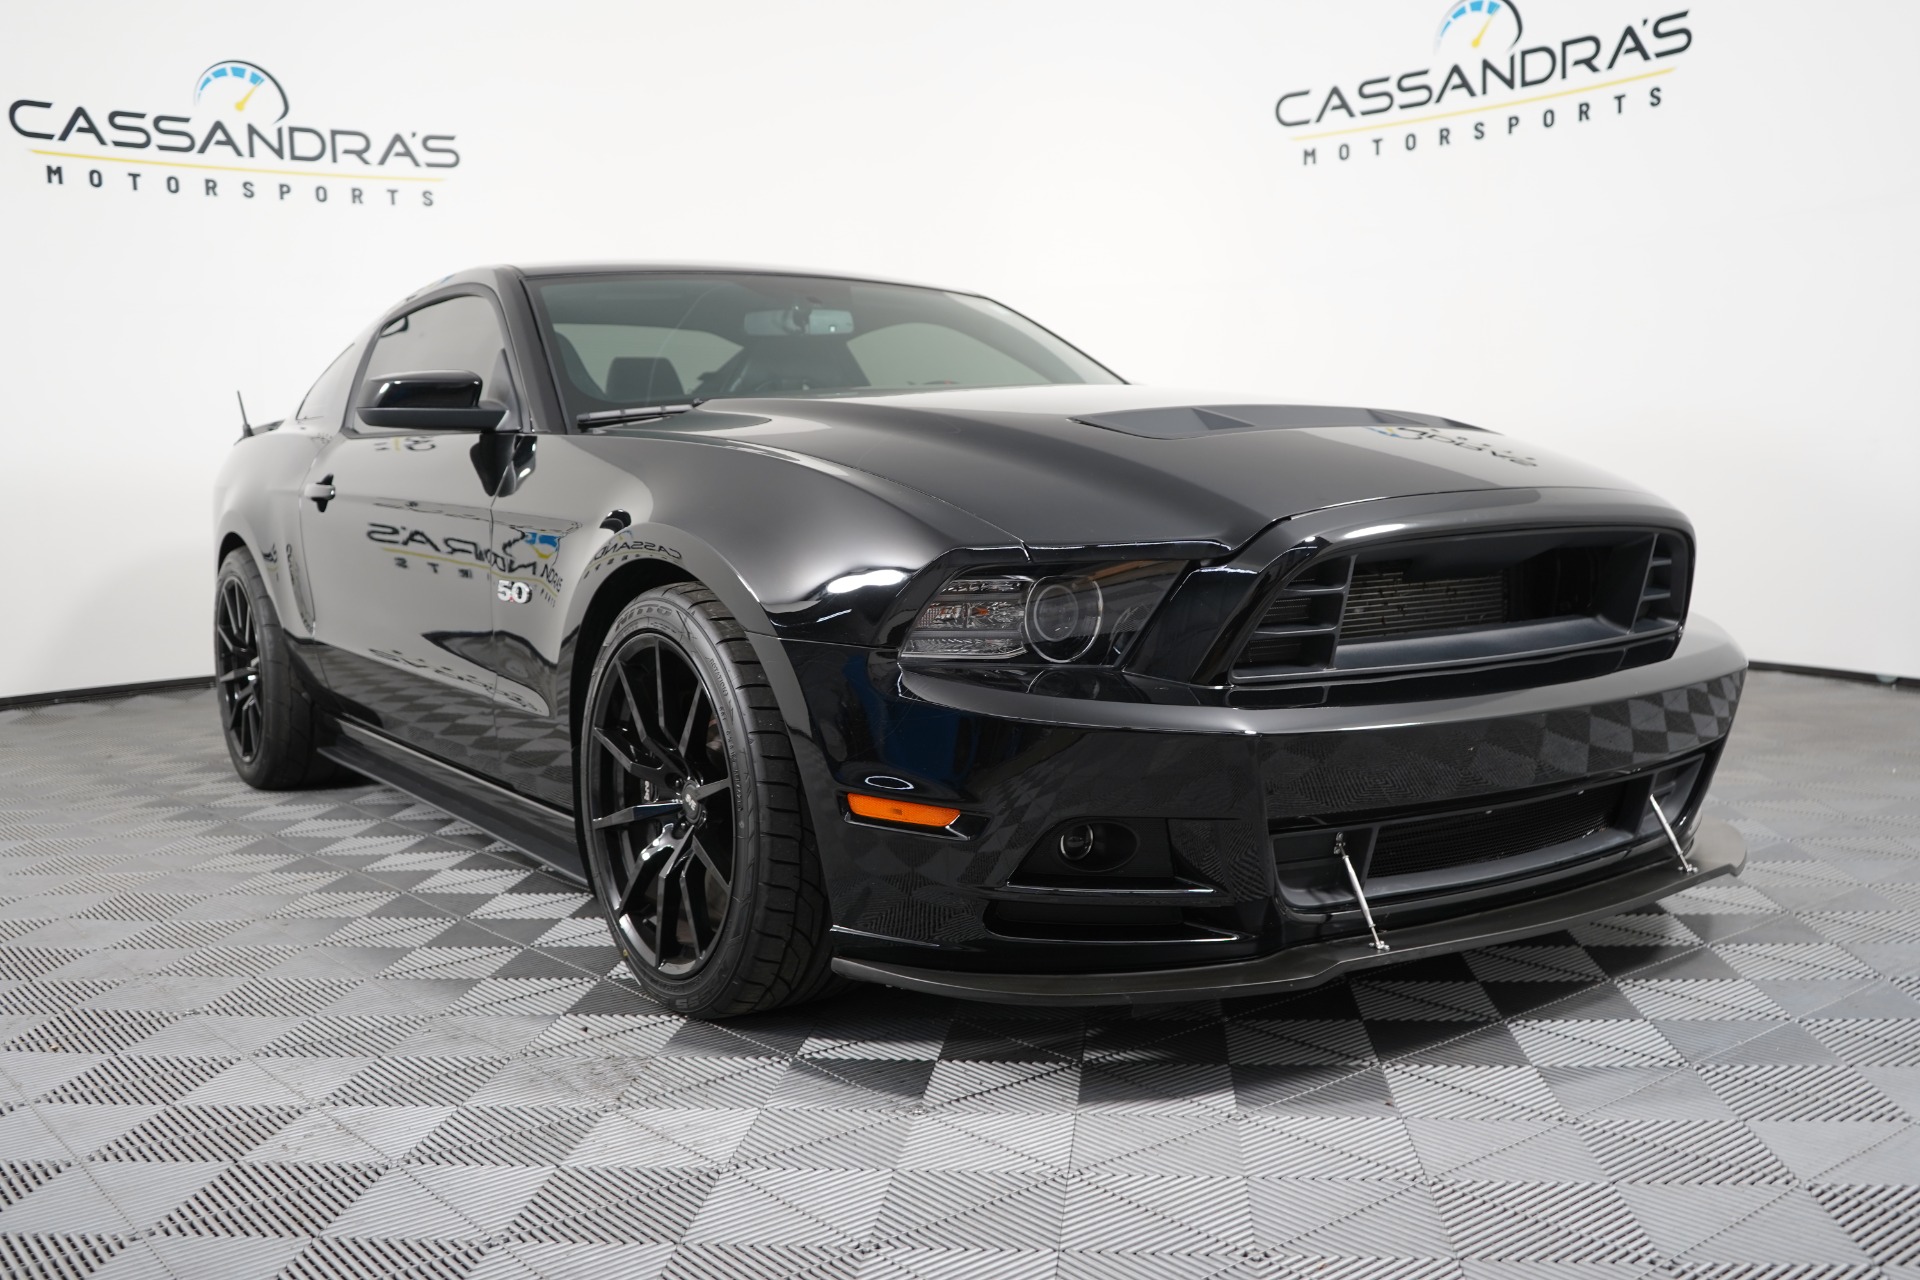 Used 2014 Ford Mustang Gt Premium Paxton Supercharged 660 Rwhp For Sale